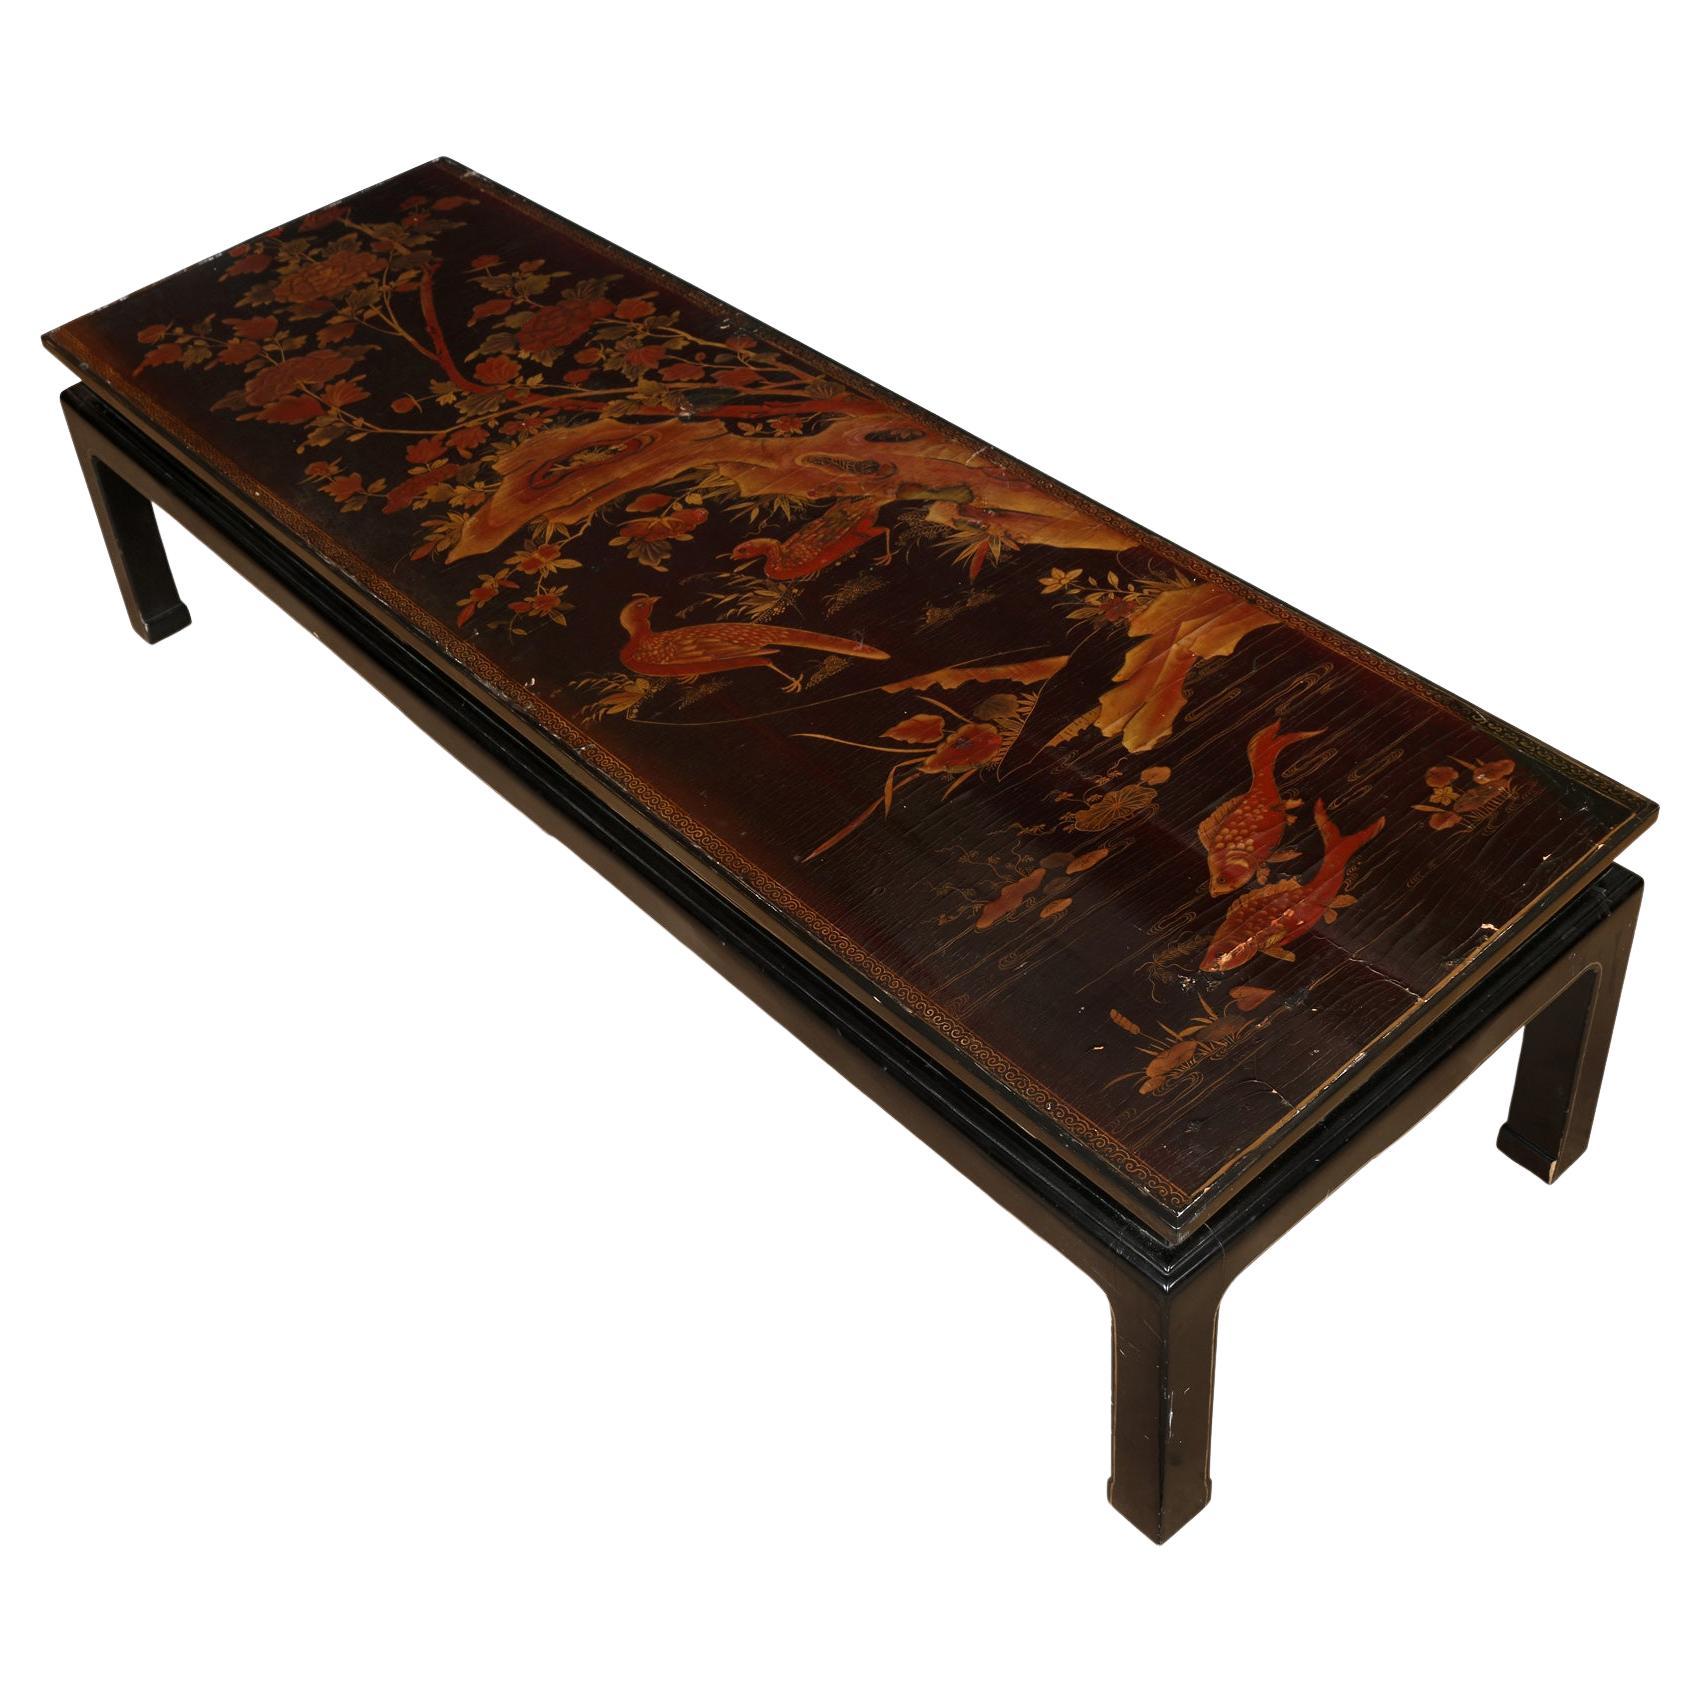 Chinese Lacquer and Parcel Gilt Decorated Coffee Table